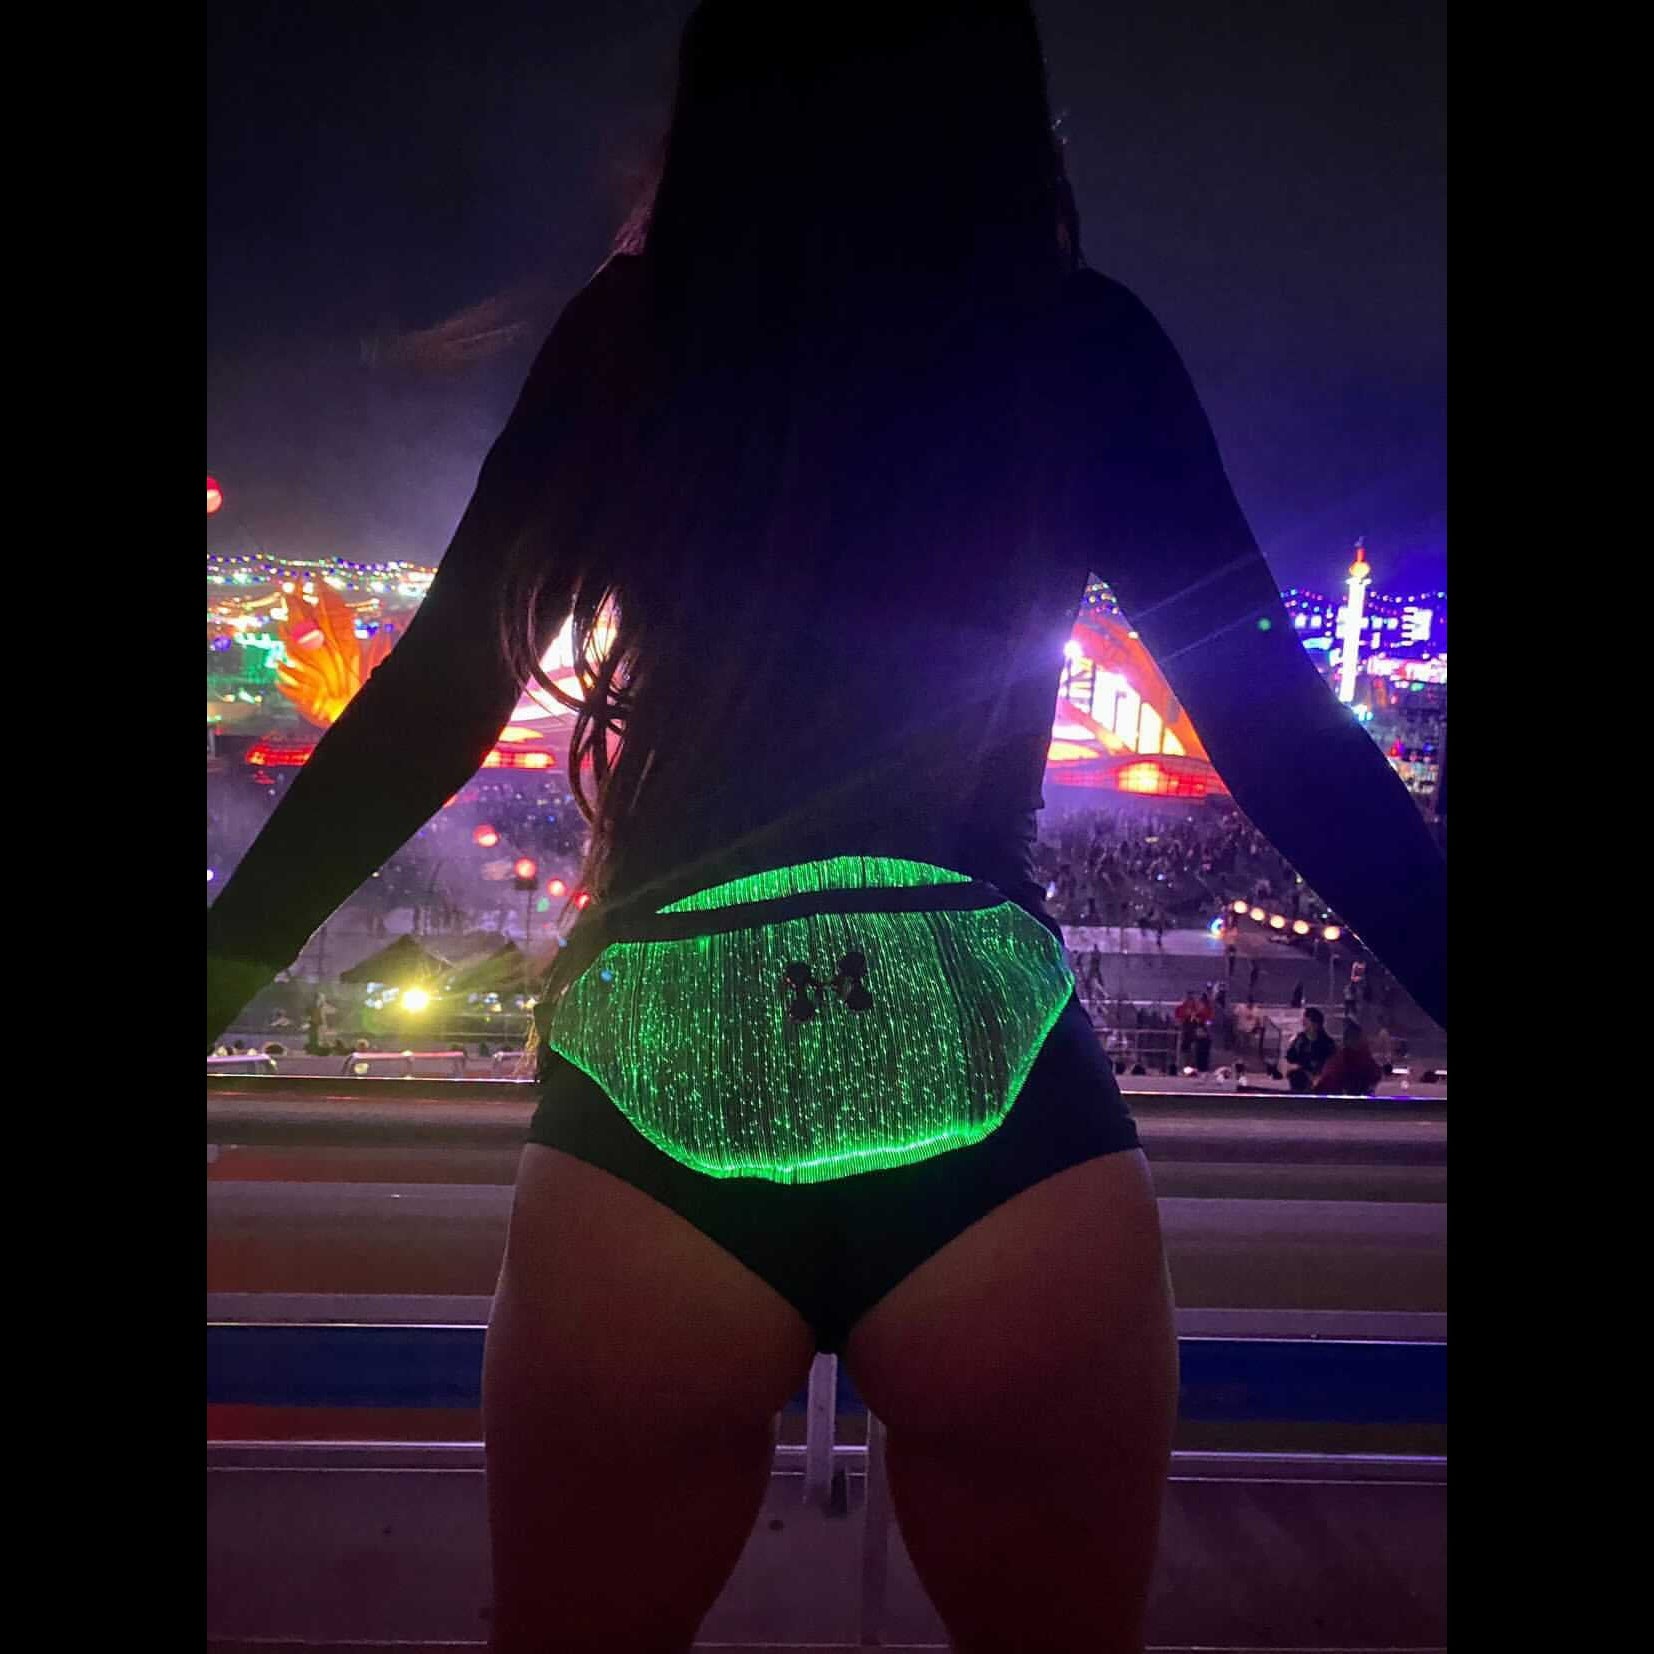 Special Festival Edition: Super Galactic Alien Fanny Pack - Glow